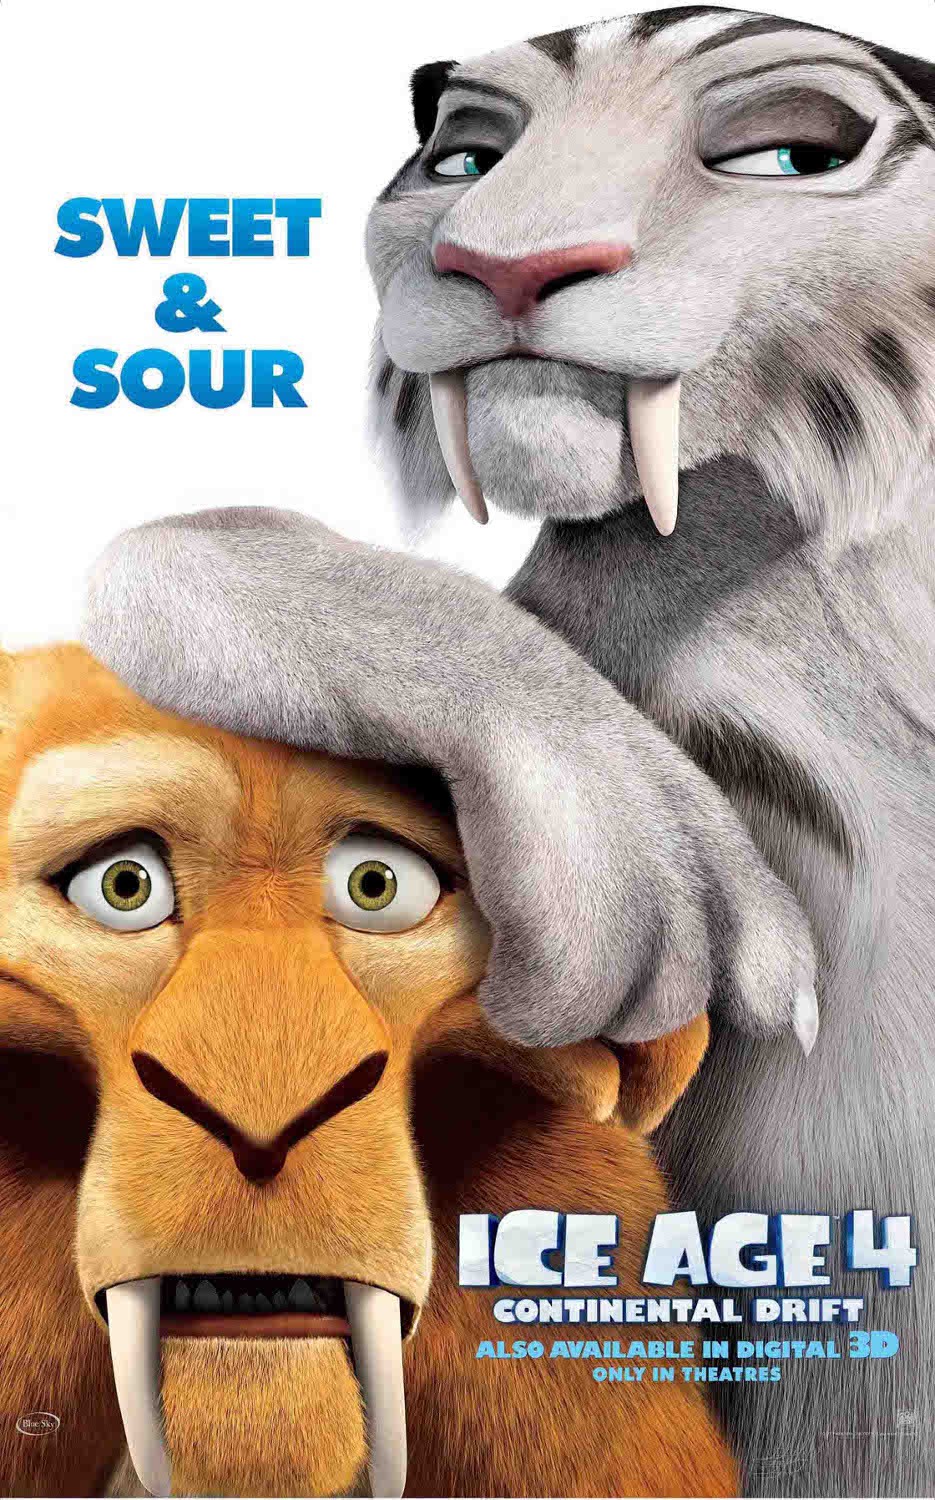 Extra Large Movie Poster Image for Ice Age: Continental Drift (#5 of 13)